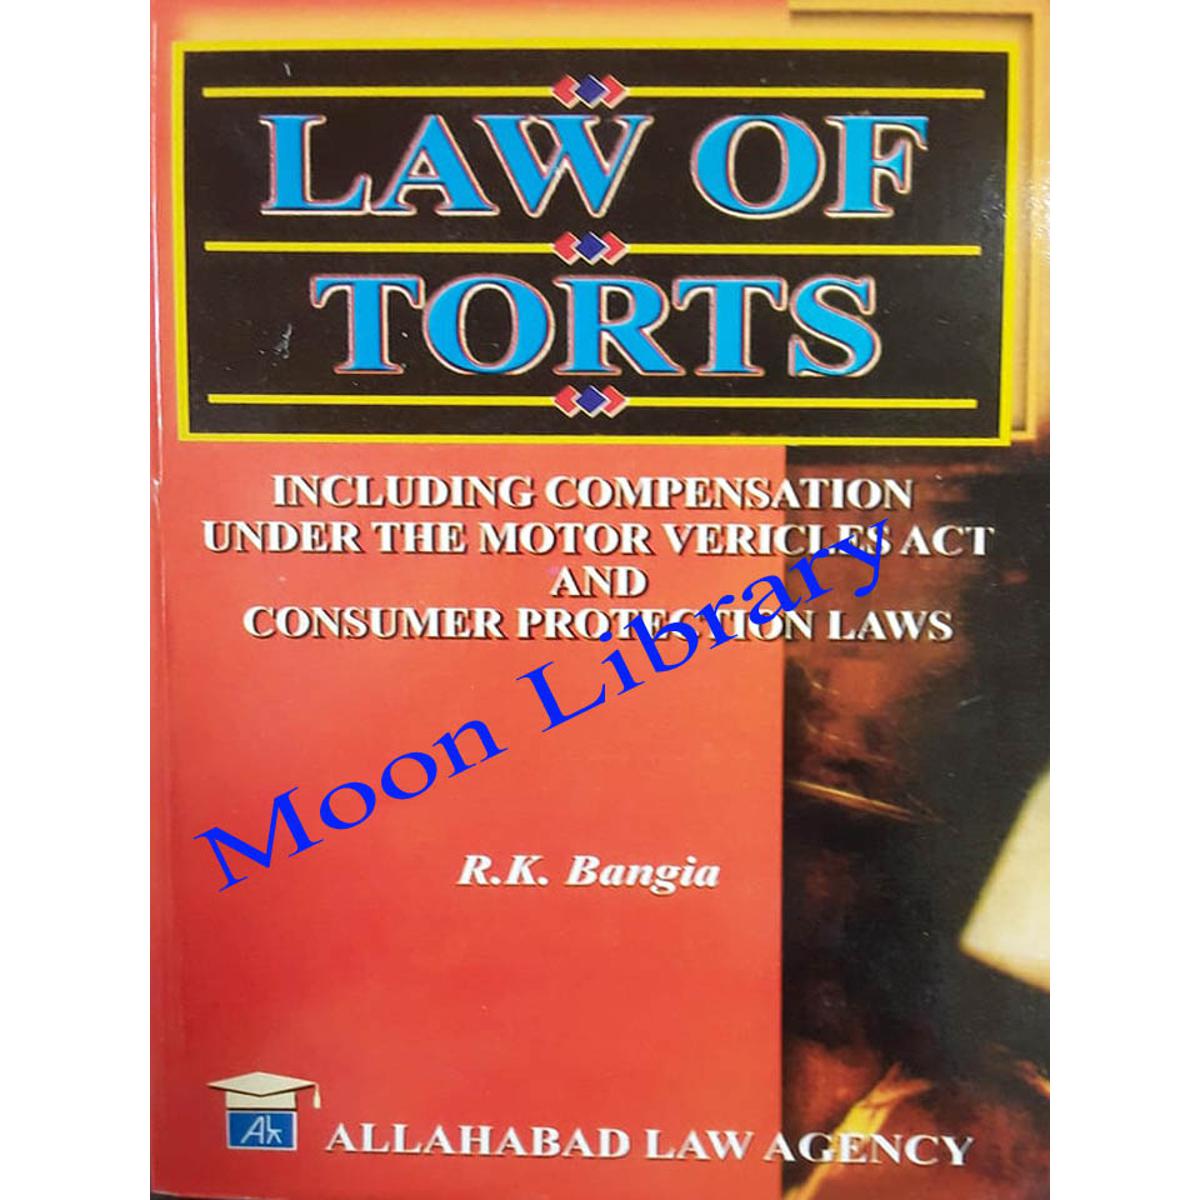 Law of Torts by R.K Bangia